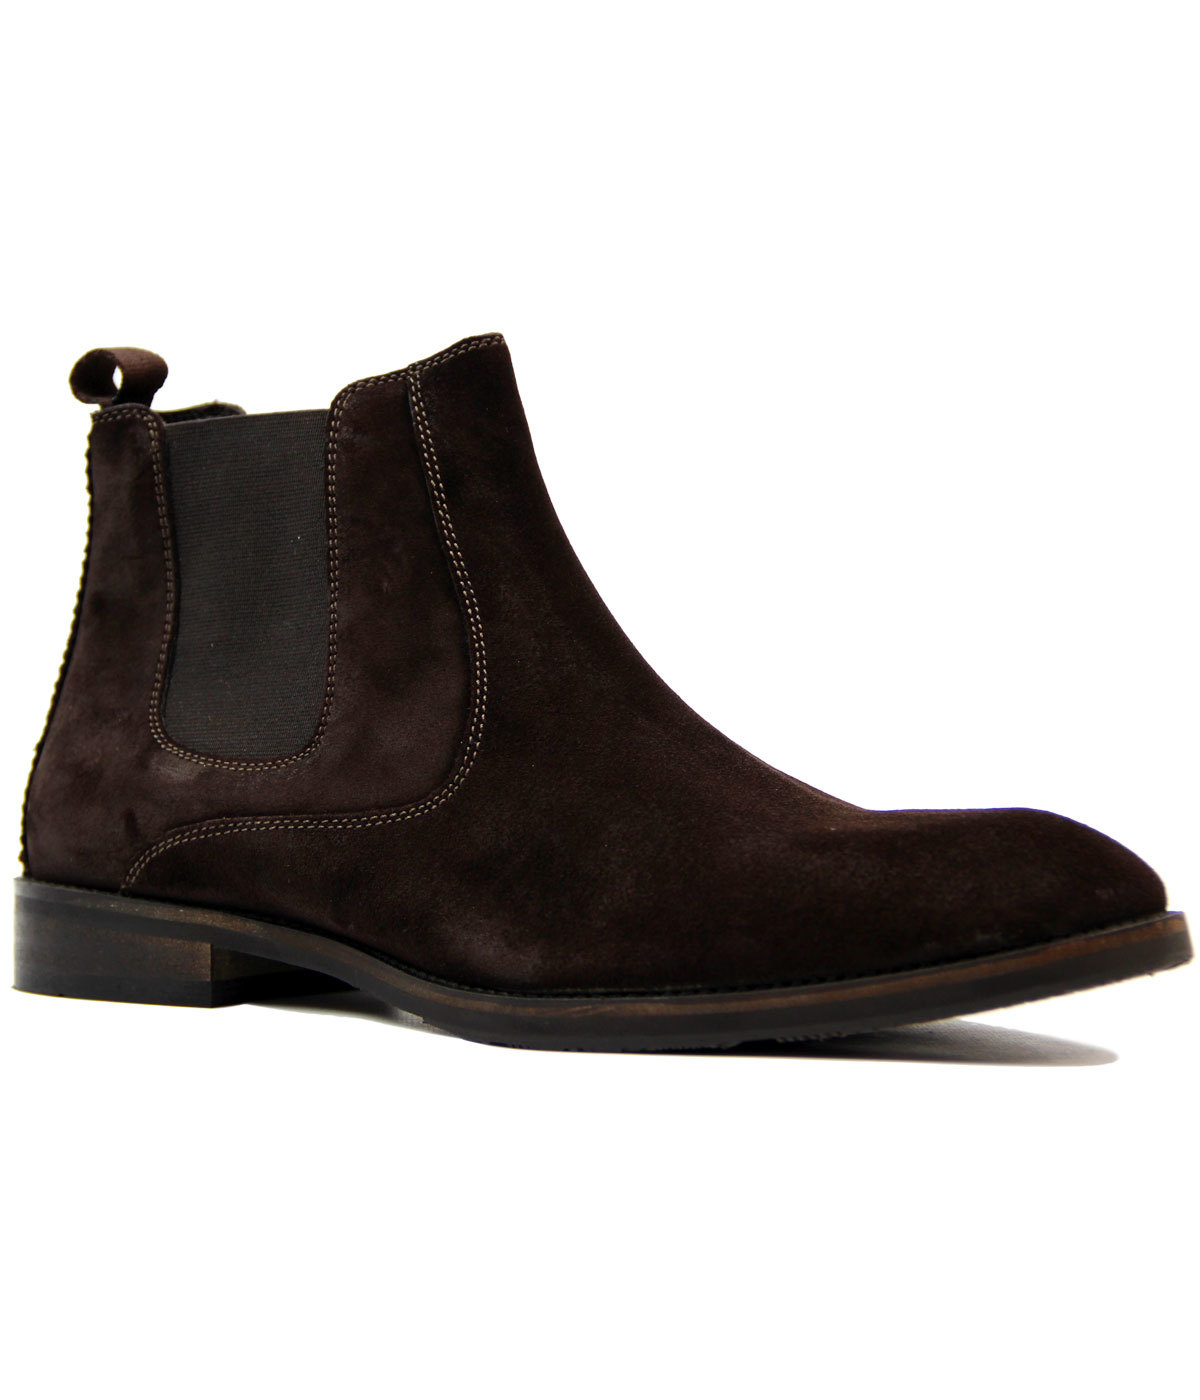 Pulford PAOLO VANDINI 60s Mod Suede Chelsea Boots